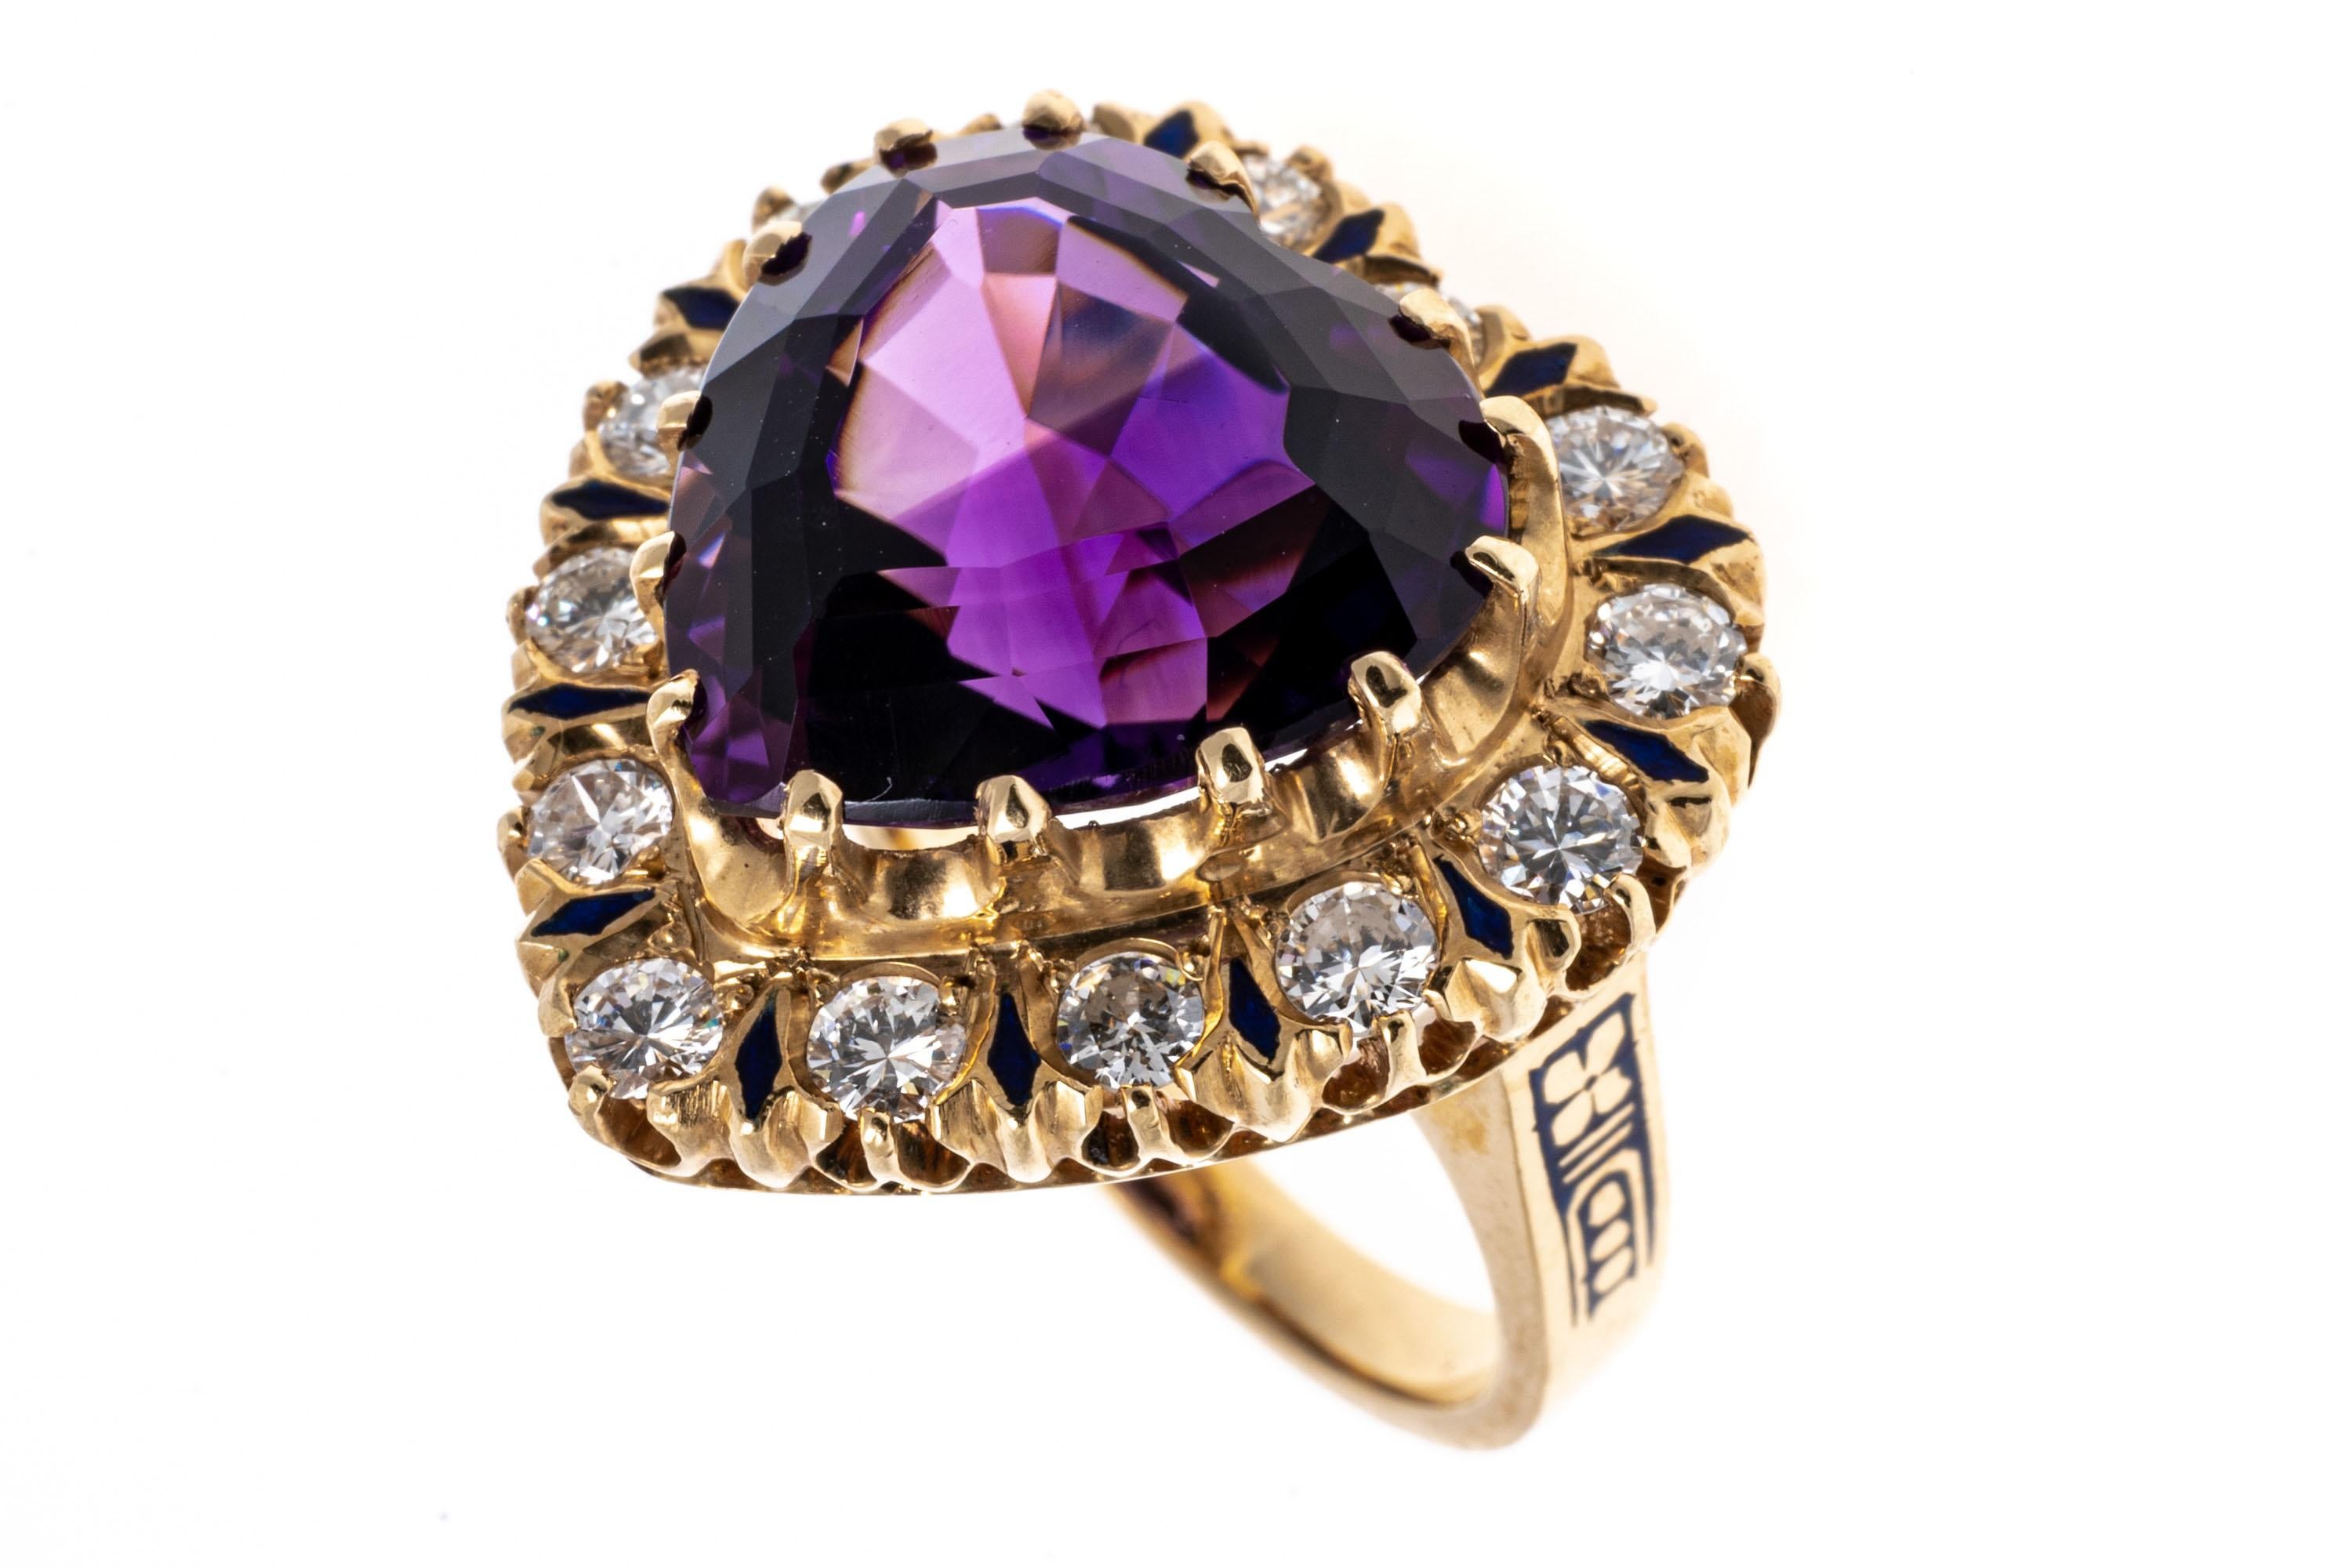 14k yellow gold ring. The spectacular vintage ring is a heart shaped motif, featuring a heart shaped faceted, dark purple color amethyst center, approximately 8.08 CTS, prong set, and decorated with a halo of alternating large round brilliant cut